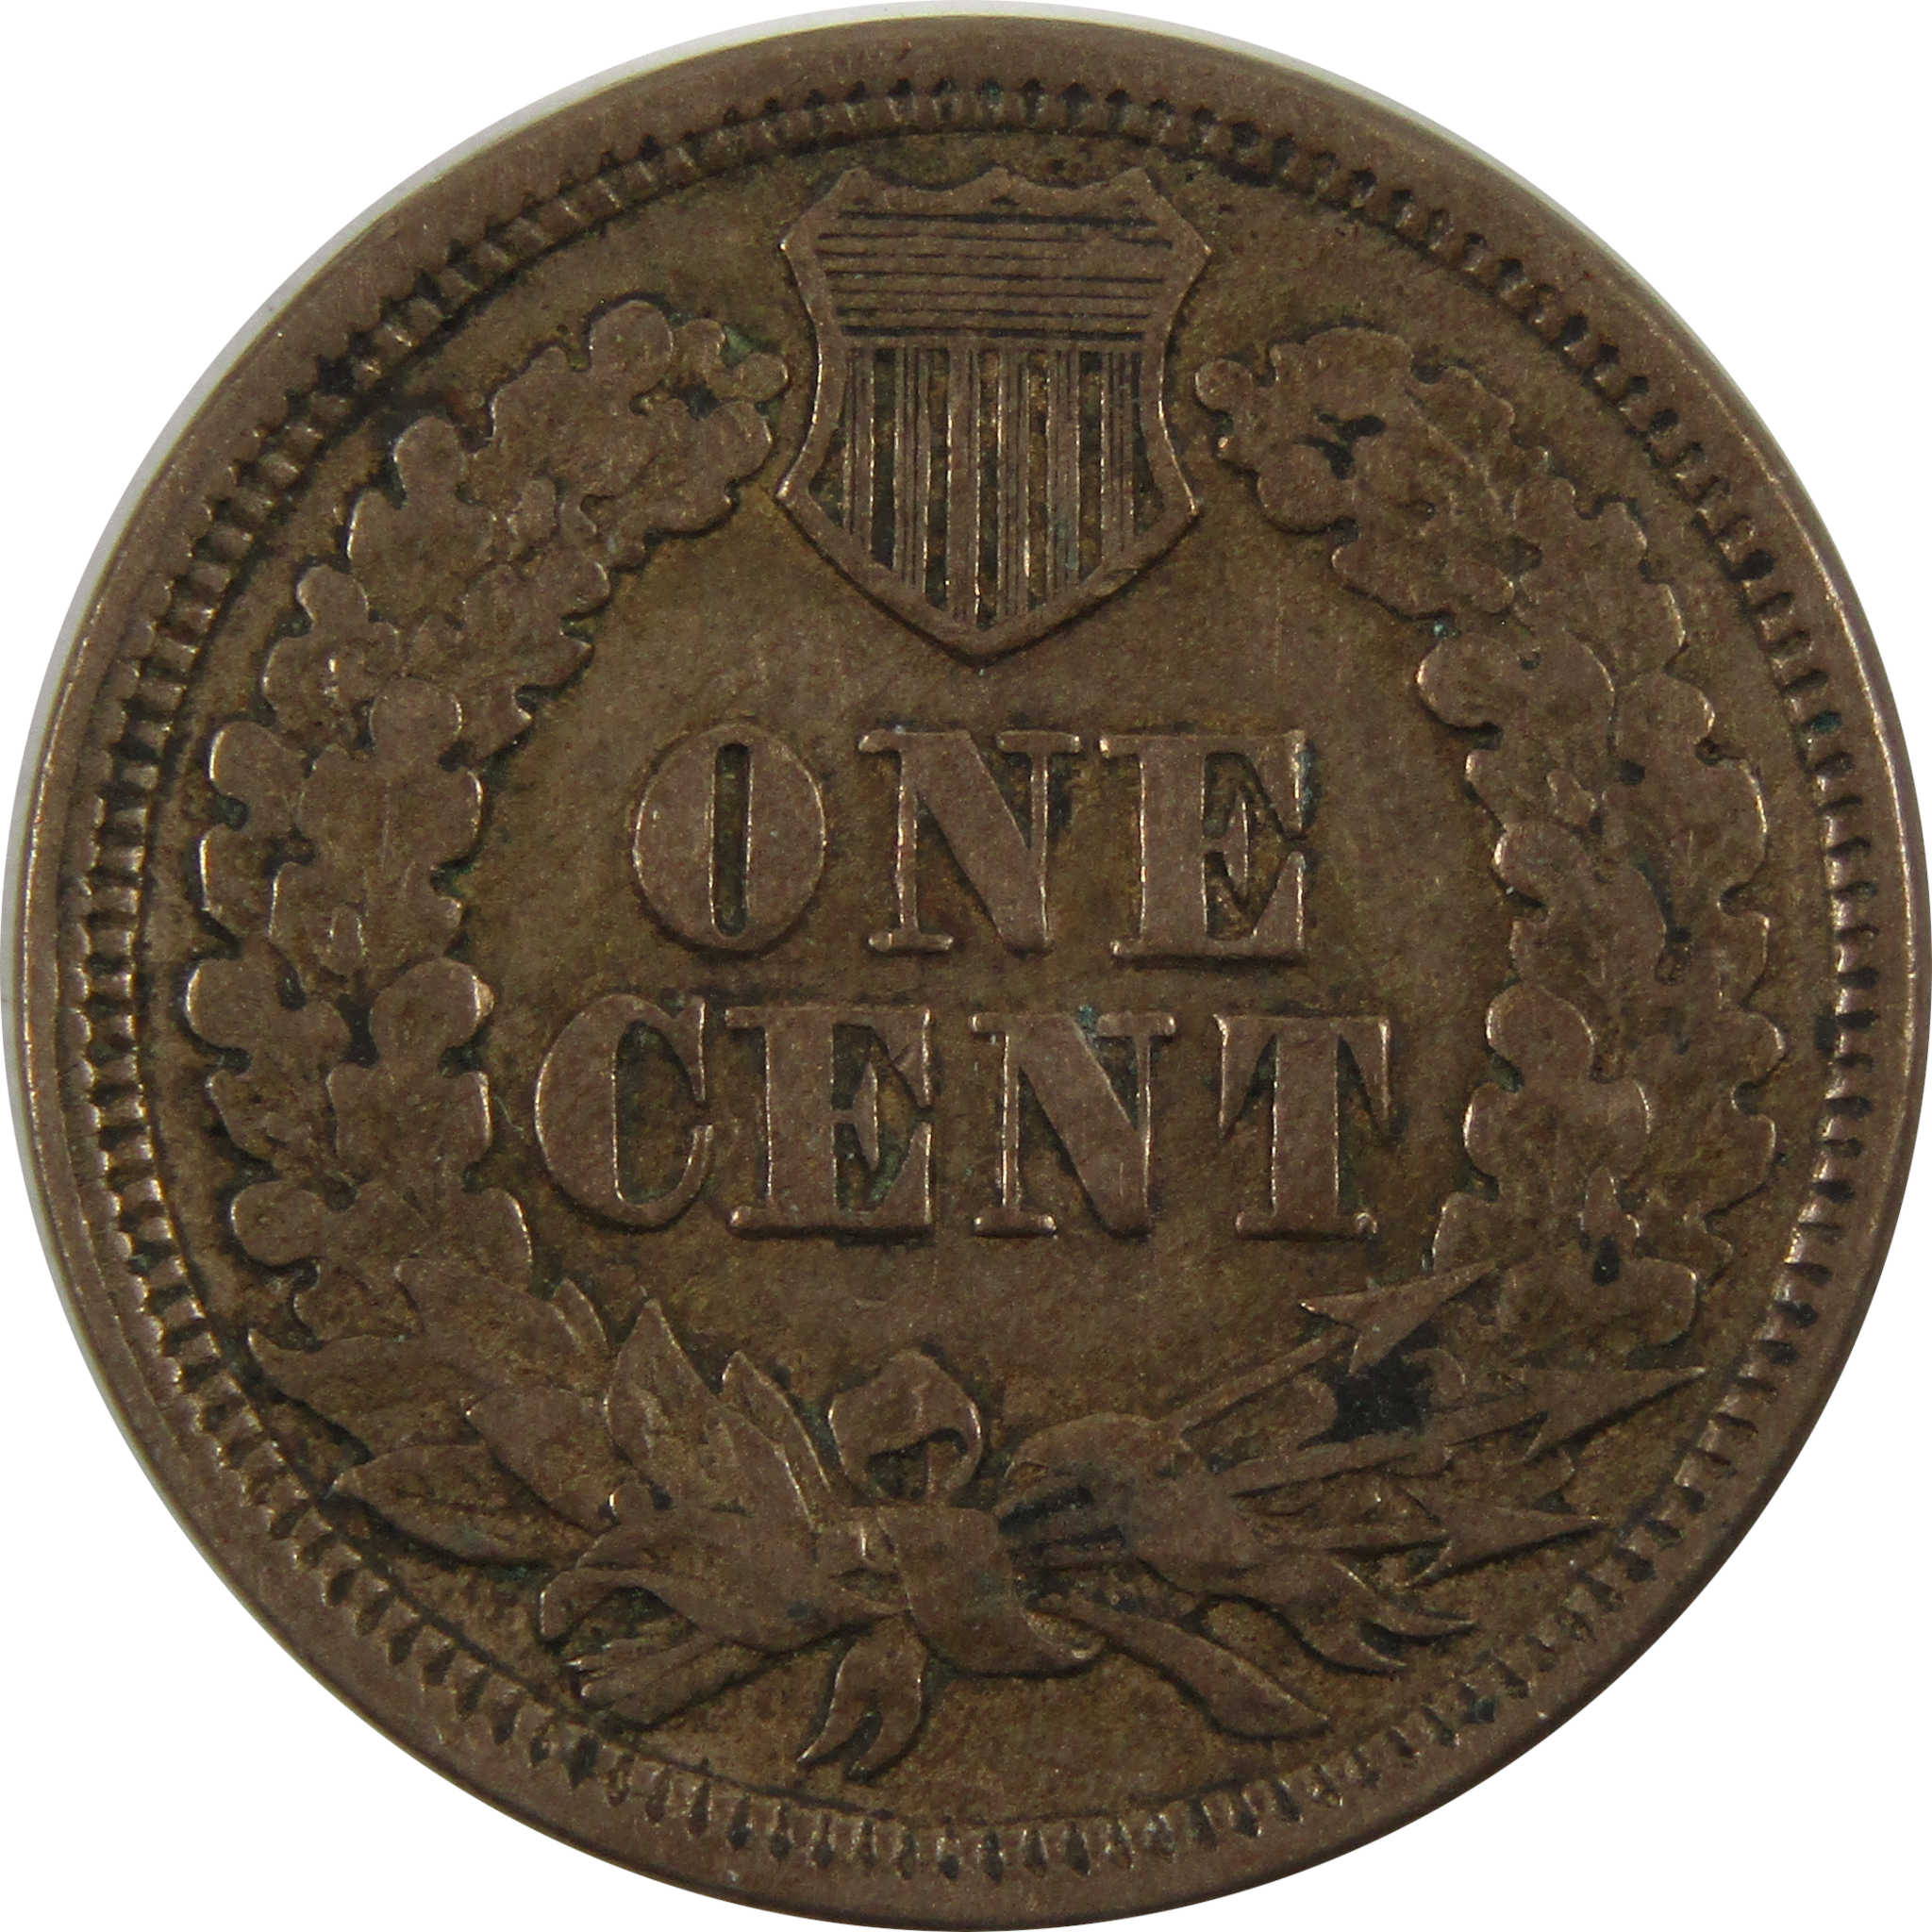 1863 Indian Head Cent XF EF Extremely Fine Copper-Nickel SKU:I7645